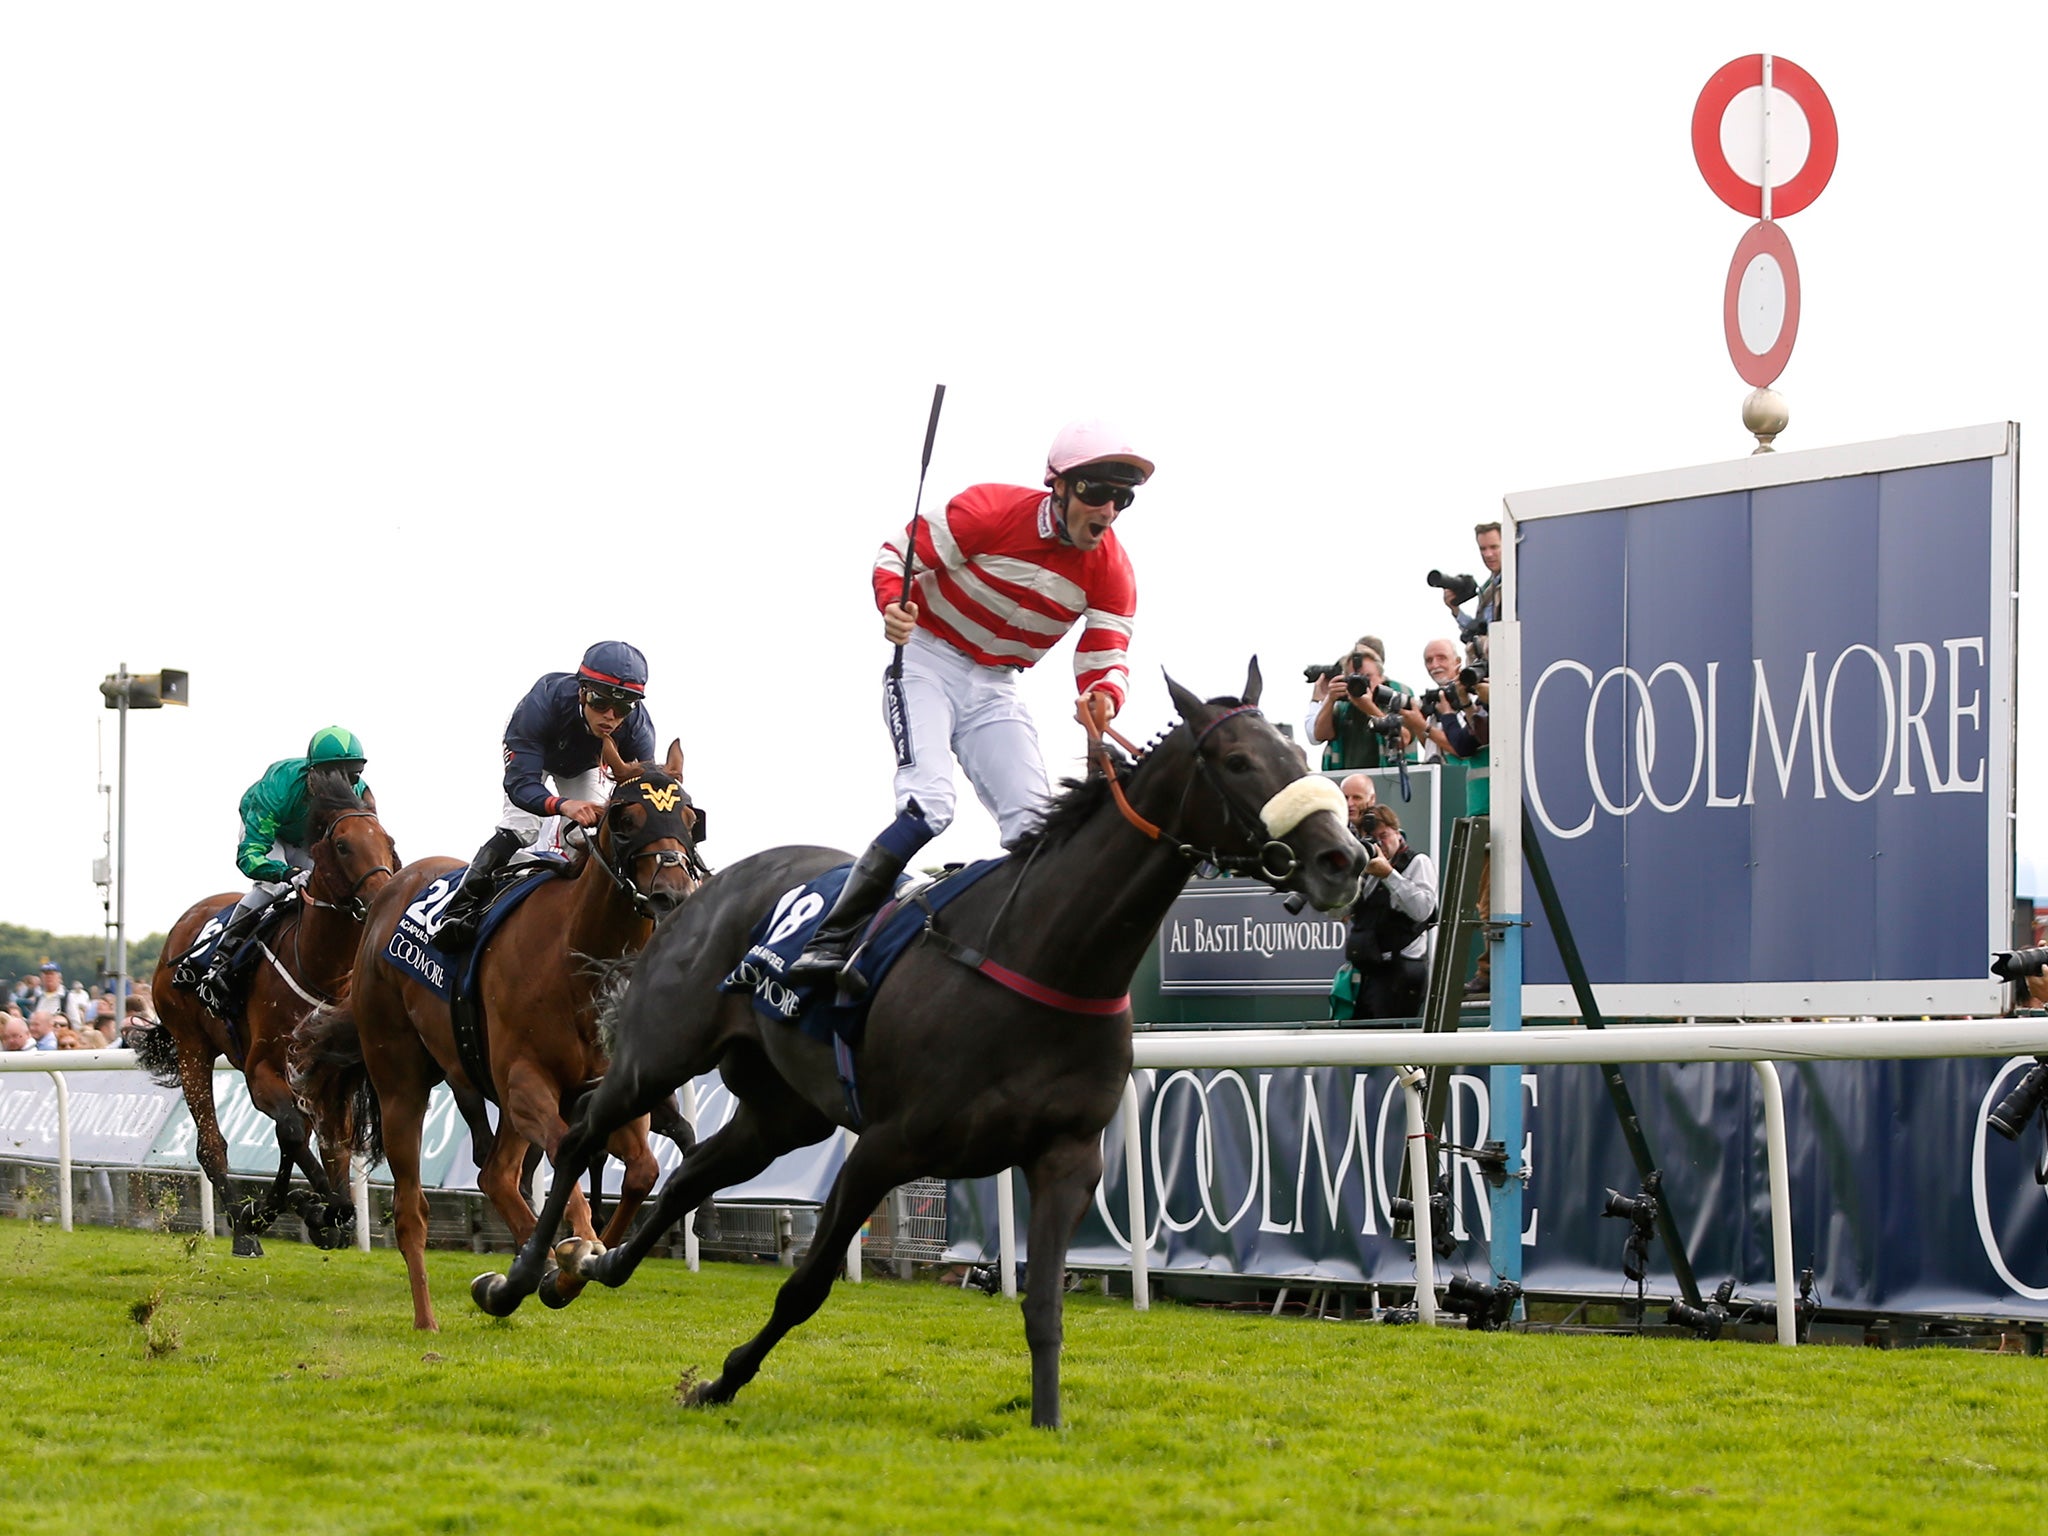 Paul Mulrennan raises his whip in triumph on Mecca’s Angel after chasing down Acapulco in the Nunthorpe Stakes at York